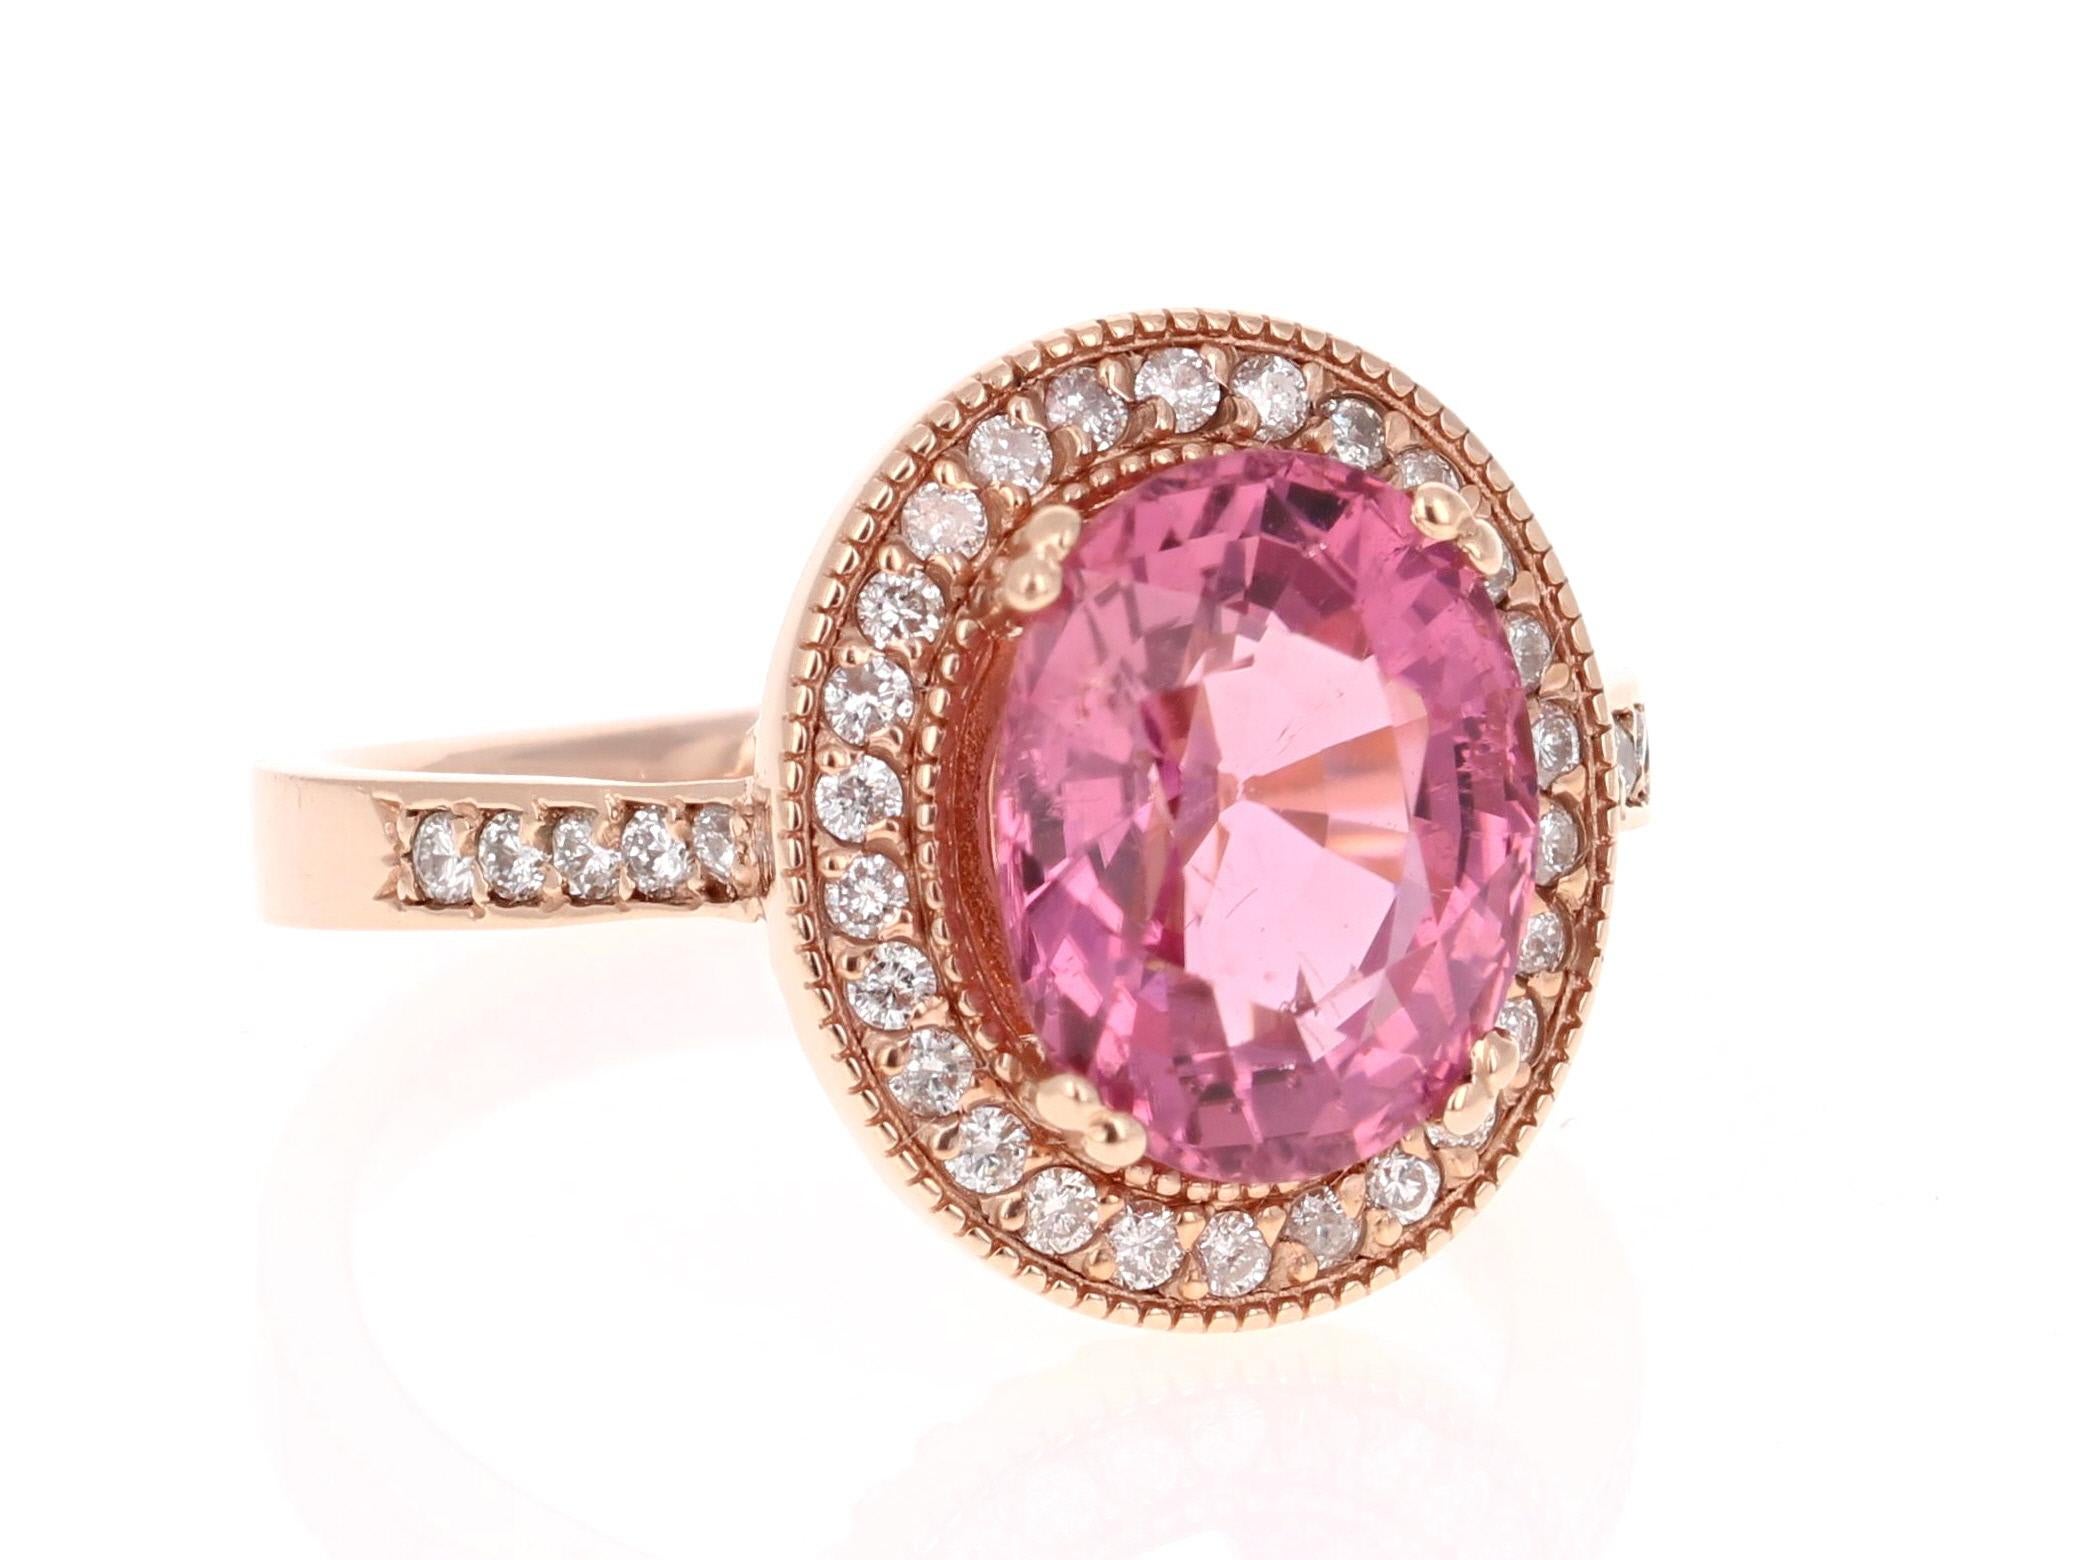 Wow! Beautiful and Radiant Pink Tourmaline Ring in a gorgeous Rose Gold Setting.

This ring has an Oval Cut Pink Tourmaline that weighs 3.59 Carats. Floating around the tourmaline are 36 Round Cut Diamonds weighing 0.34 Carats. 
The total carat